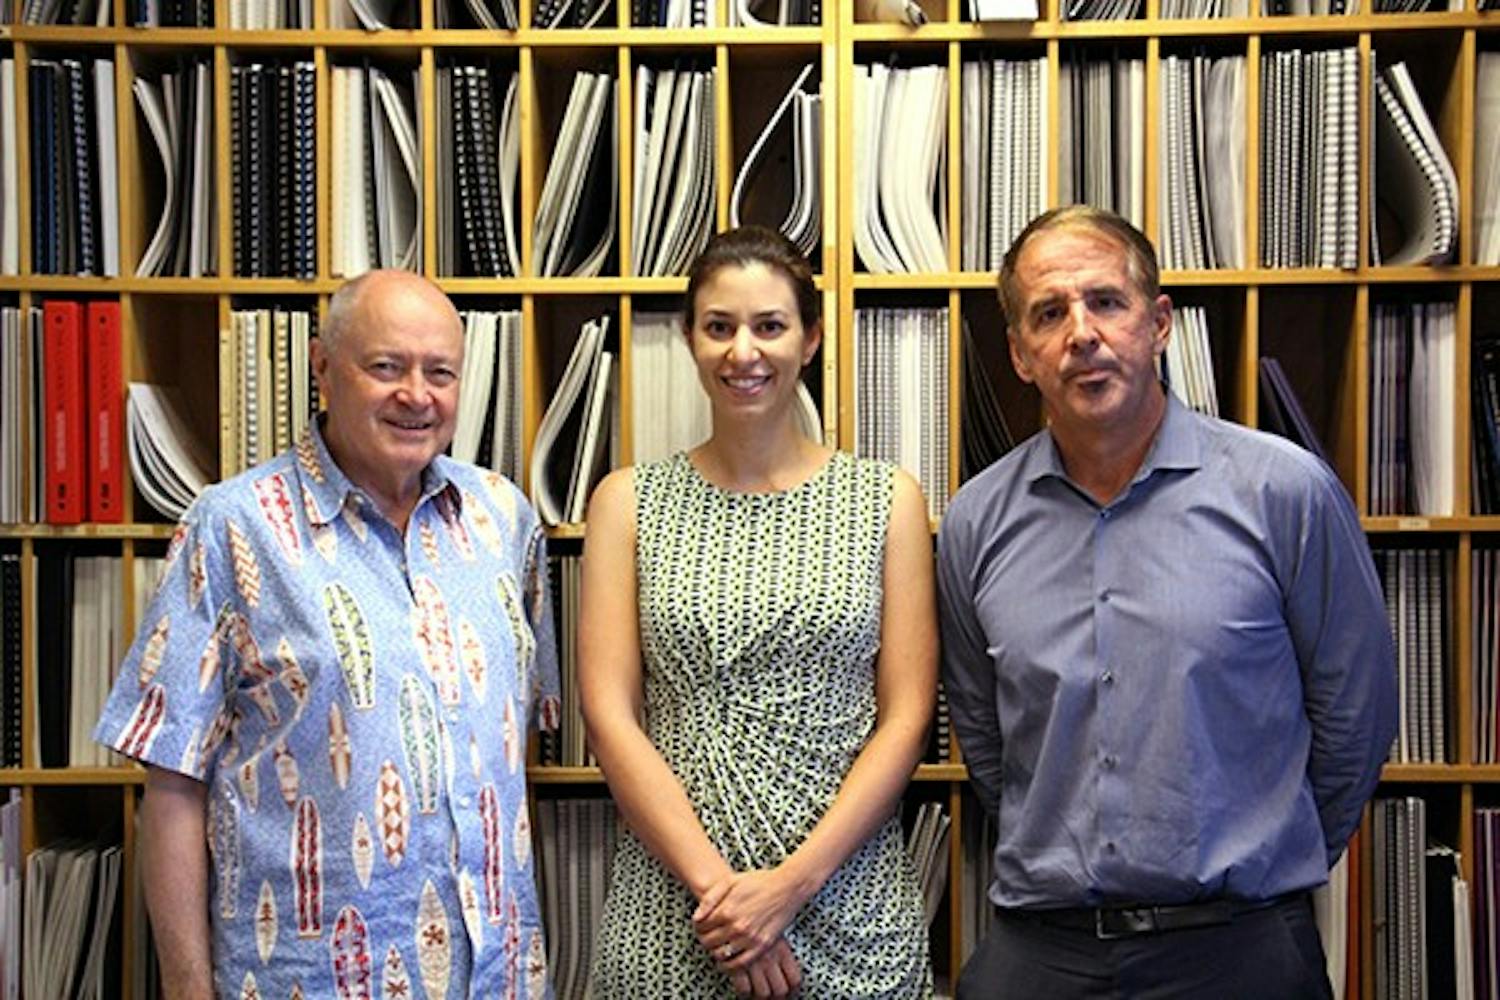 Morrison Institute's (left to right) Associate Director David Daugherty, Project Manager Andrea Whitsett, and Director Thom Reilly will help the institute host Arizona's first ever Citizens' Initiative Review, Sept. 18-21. The event will be held in the Arizona Convention Center, where citizens will focus on the Phoenix city government pension reform proposition. (Photo by Tynin Fries)